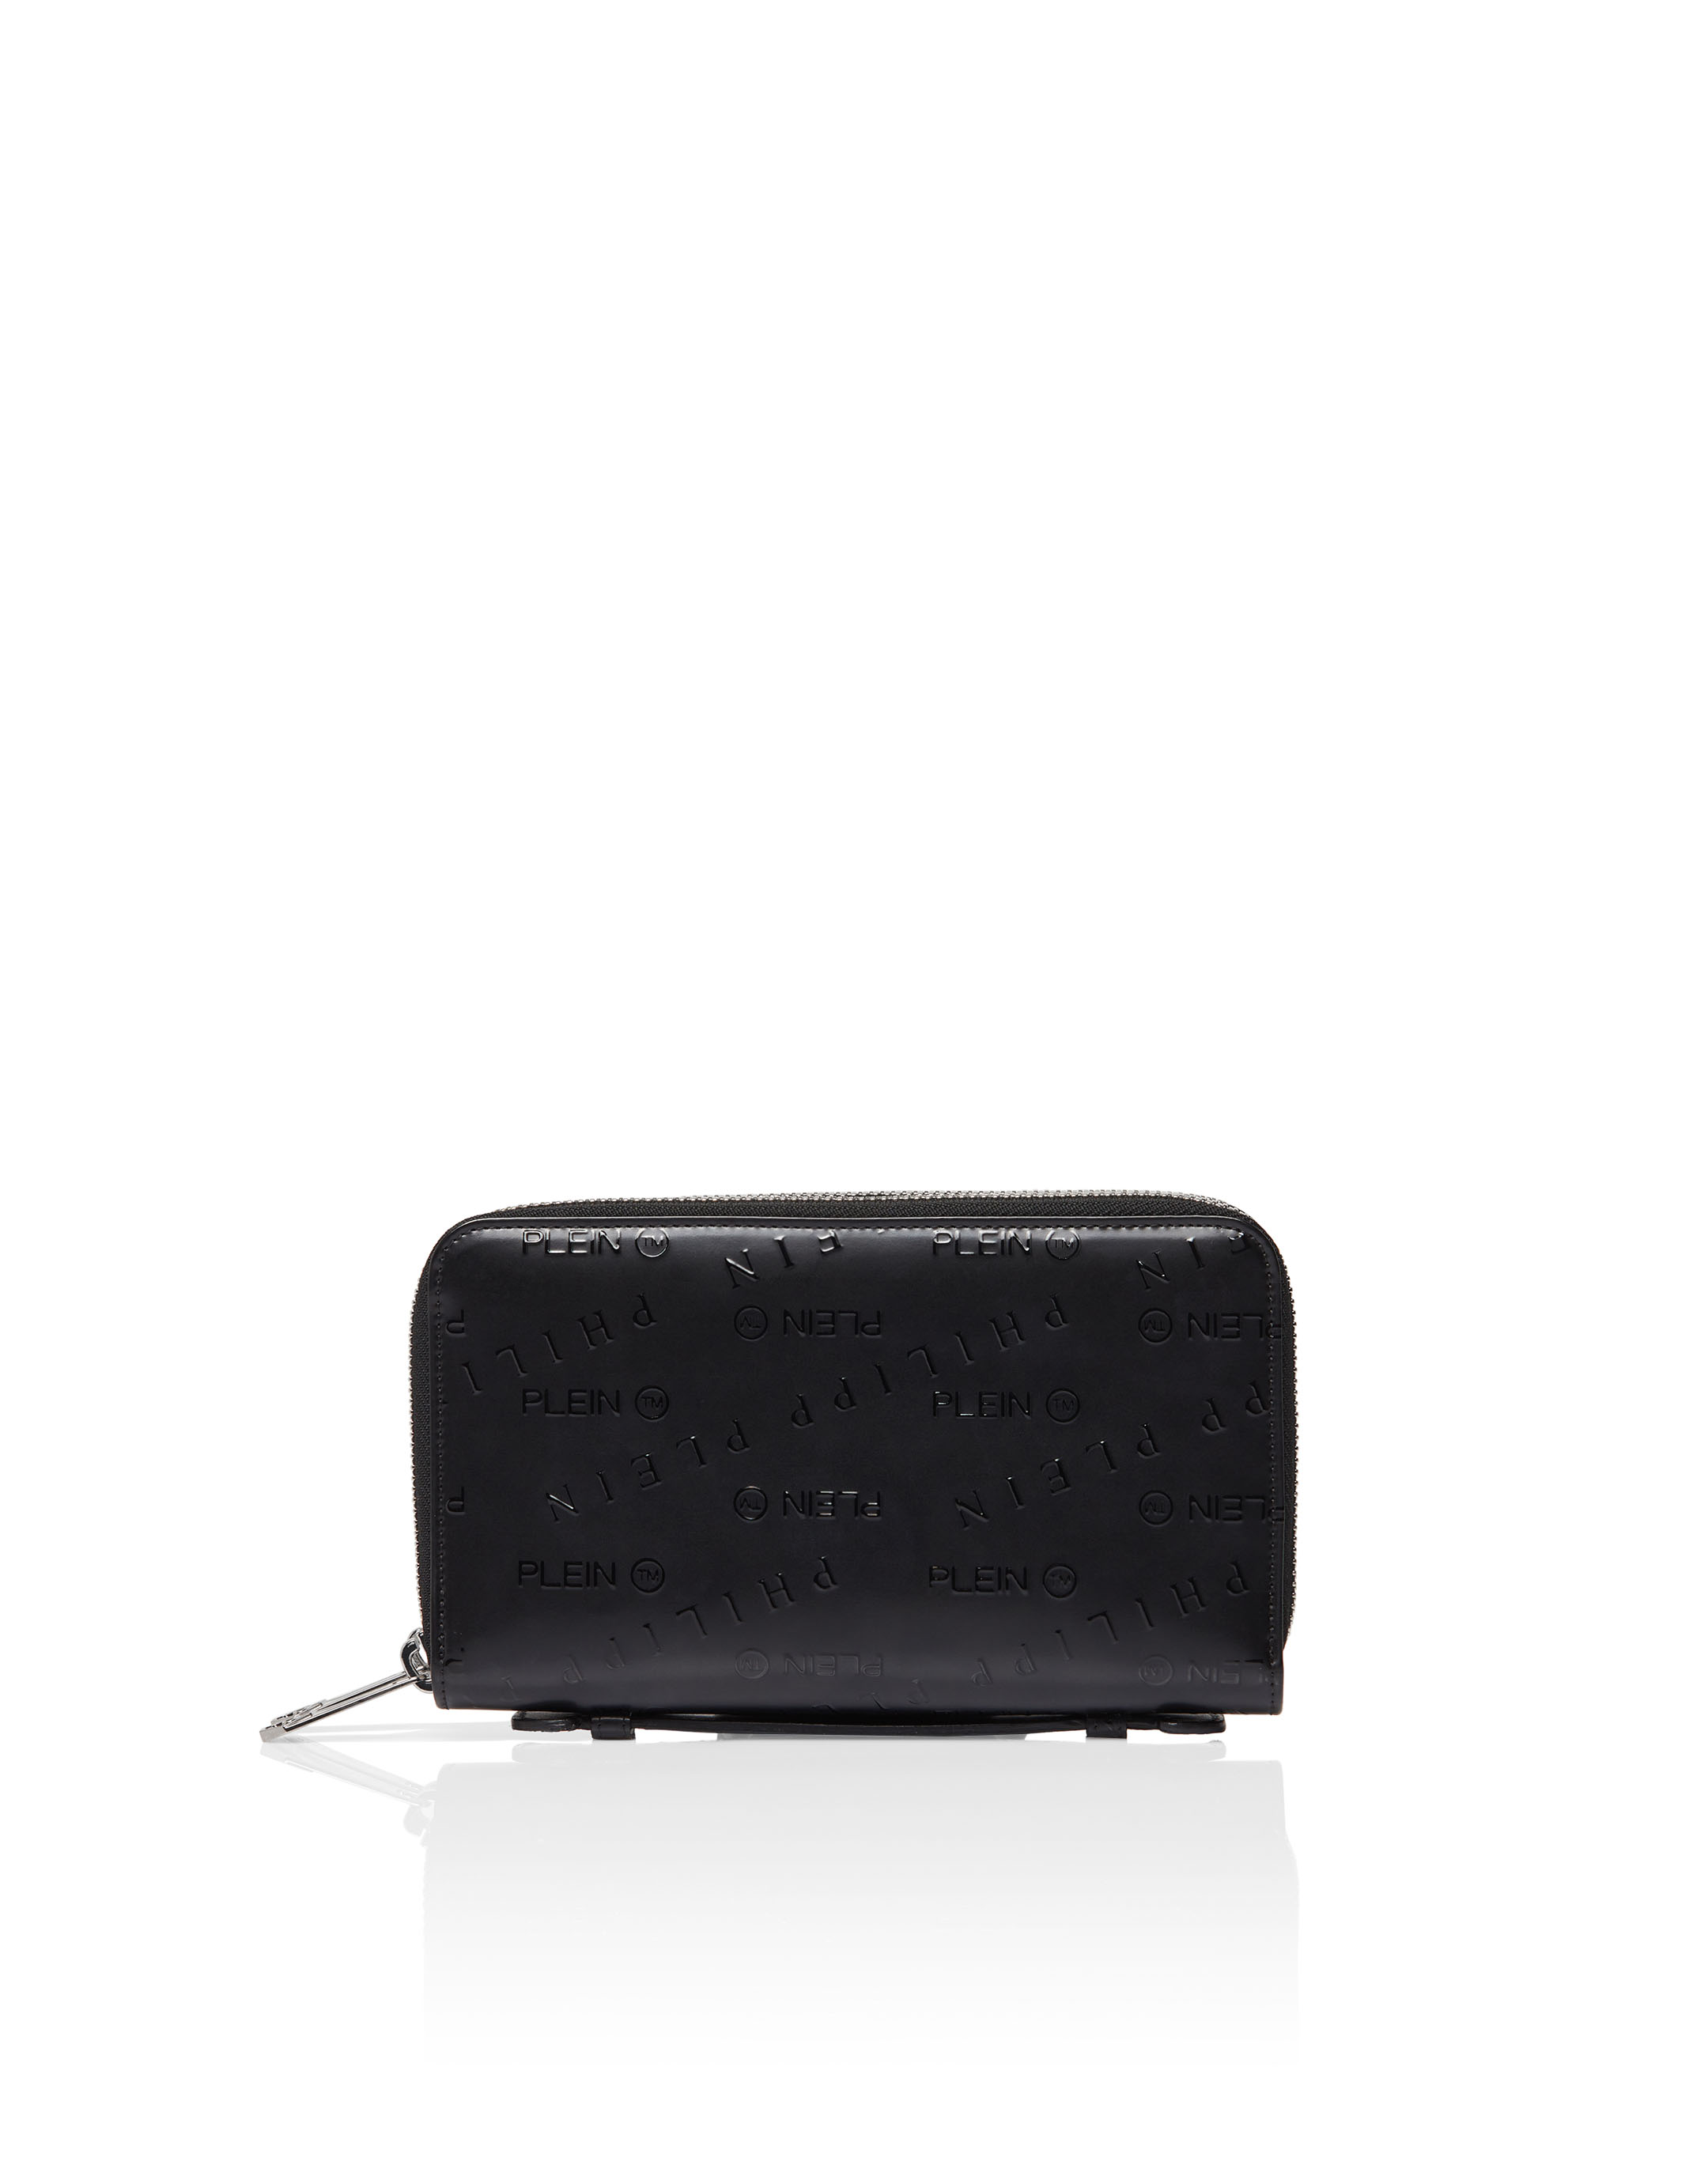 Large Continental Wallet in MCM Monogram Leather Black